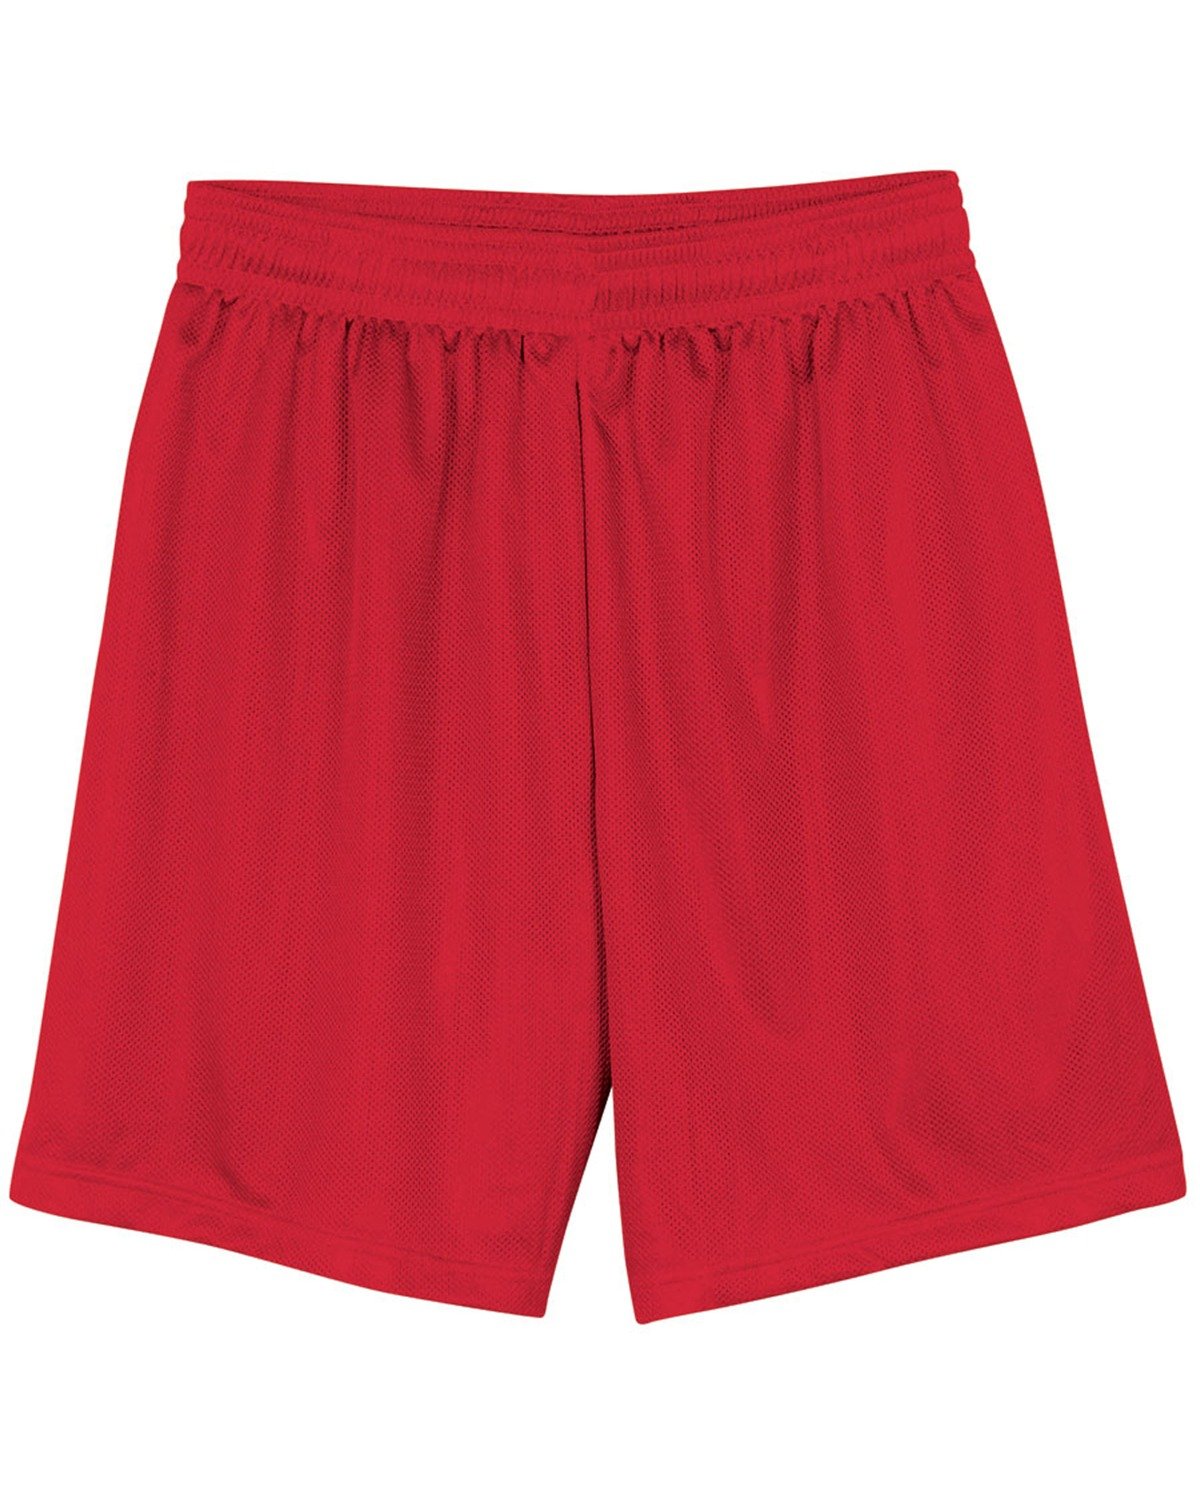 Red Micro Shorts with Zippers Cherrybomb